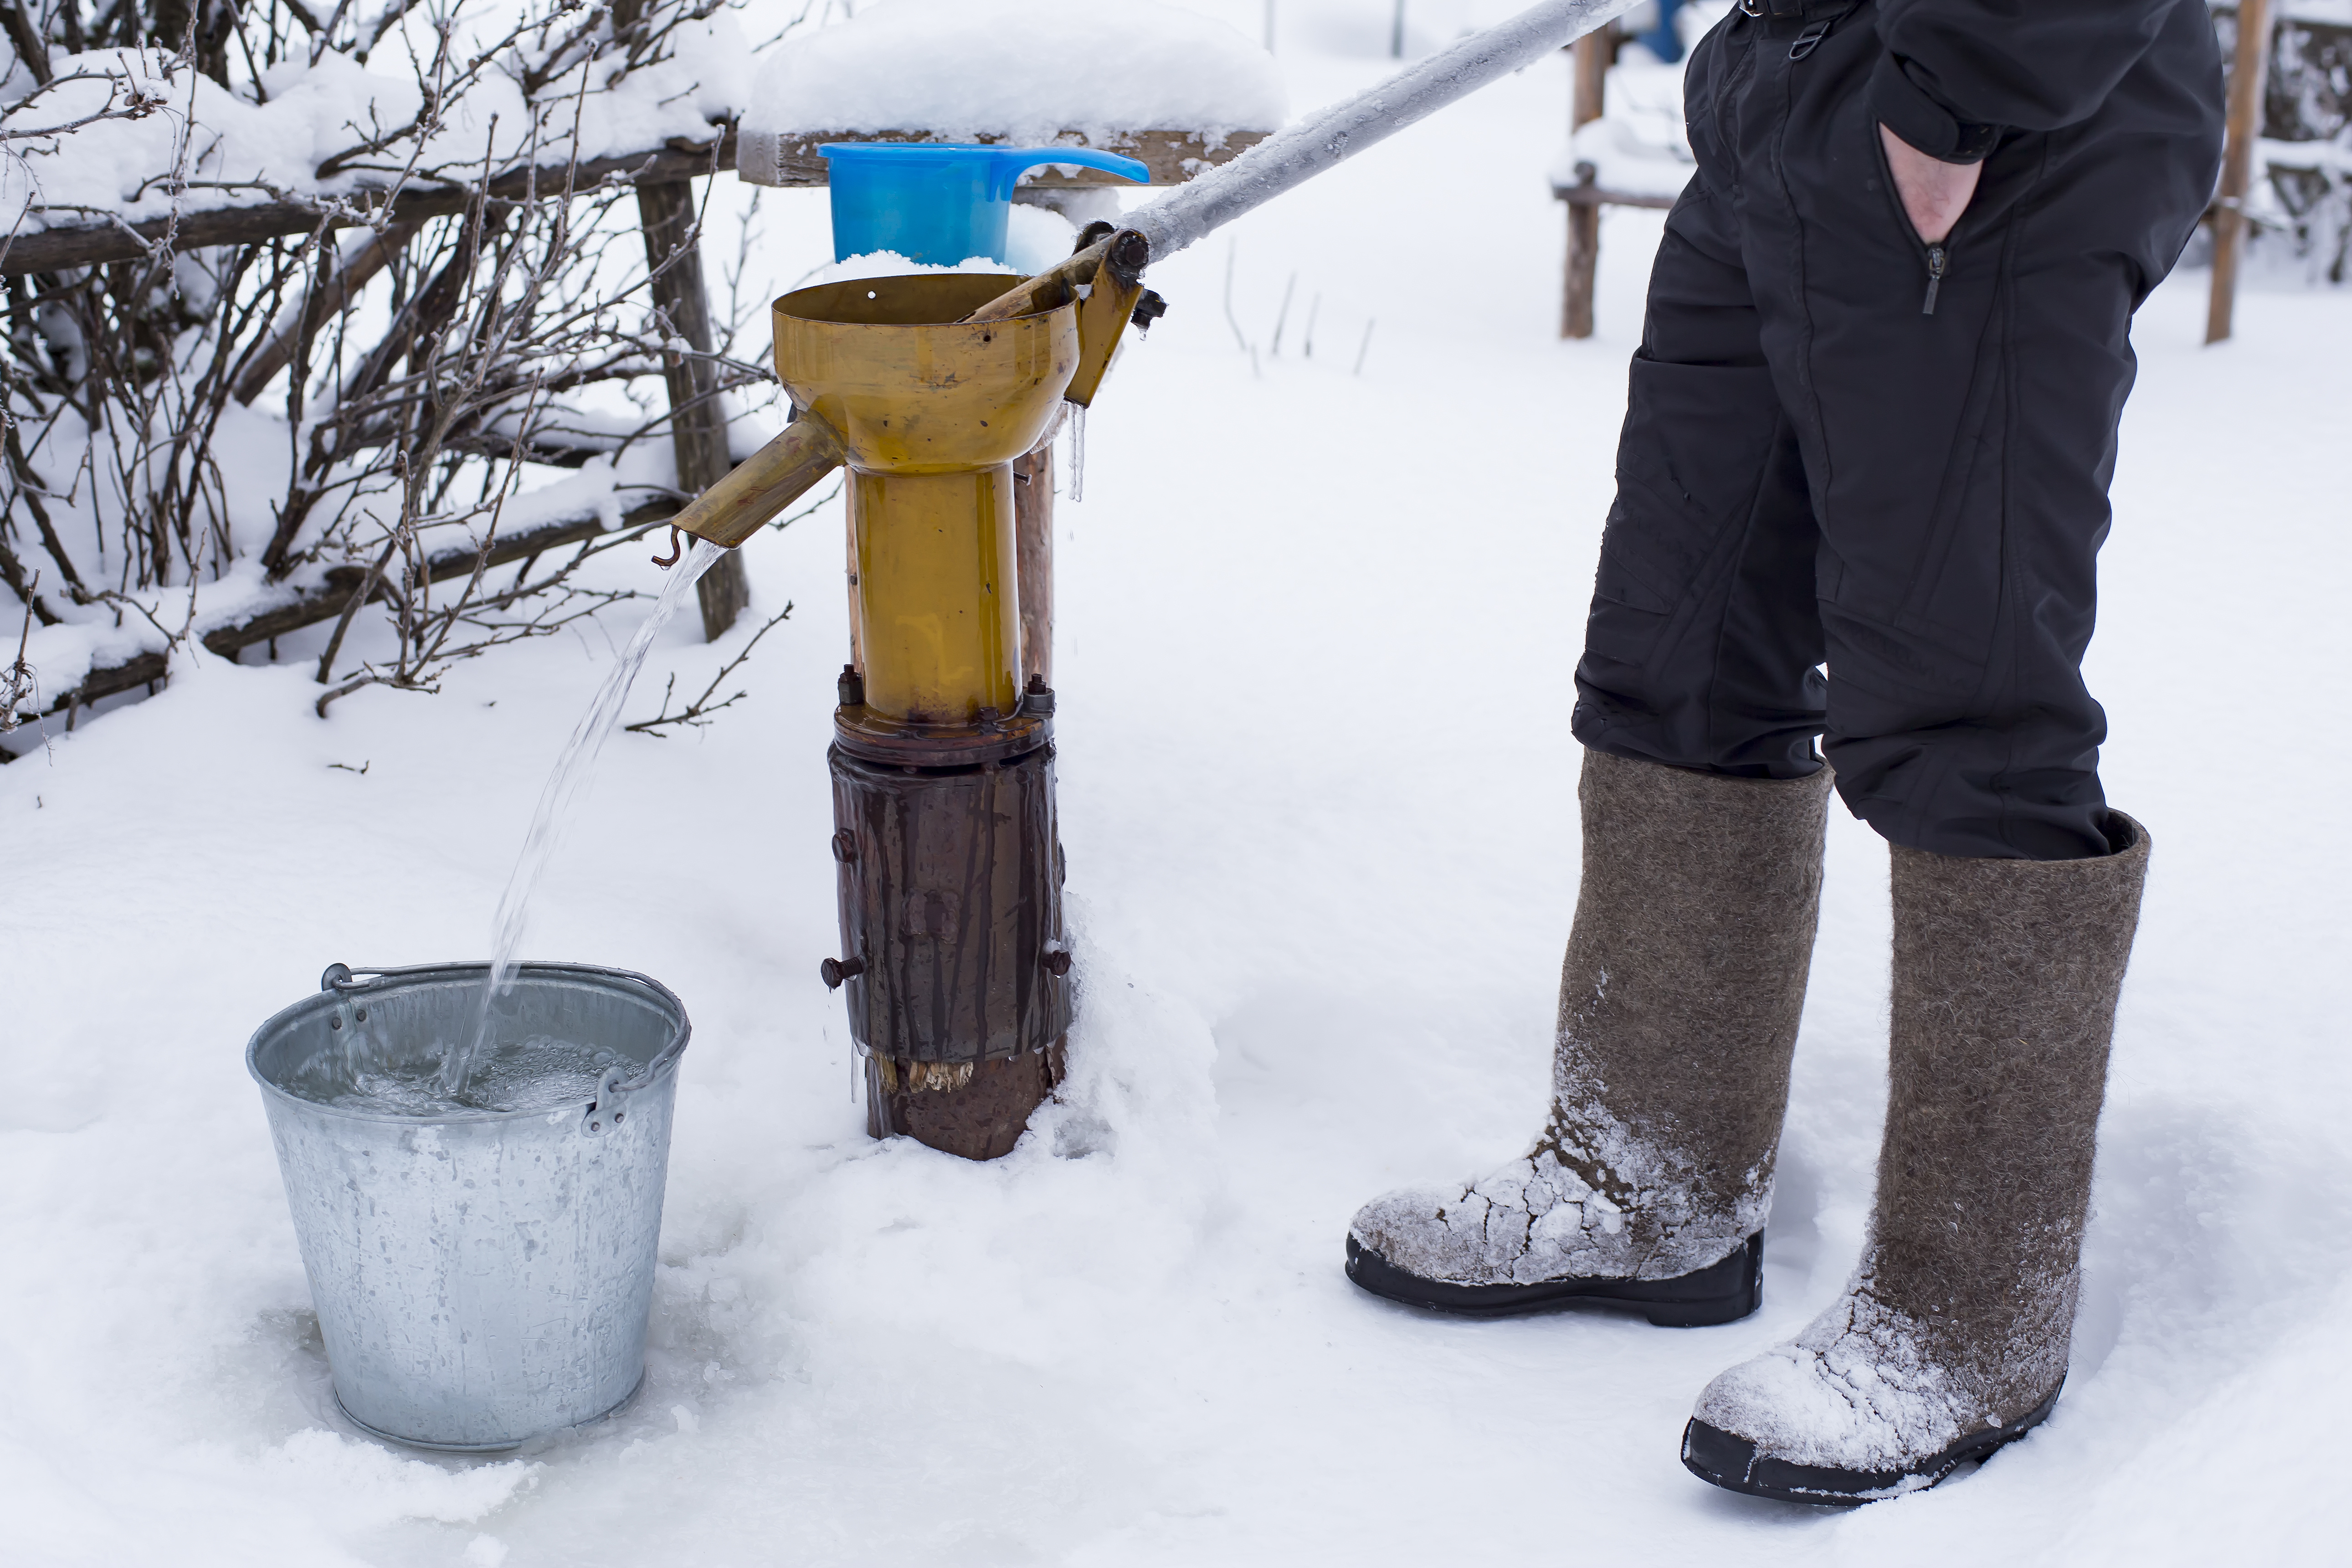 water pump being used to fill up a bucket in the snow